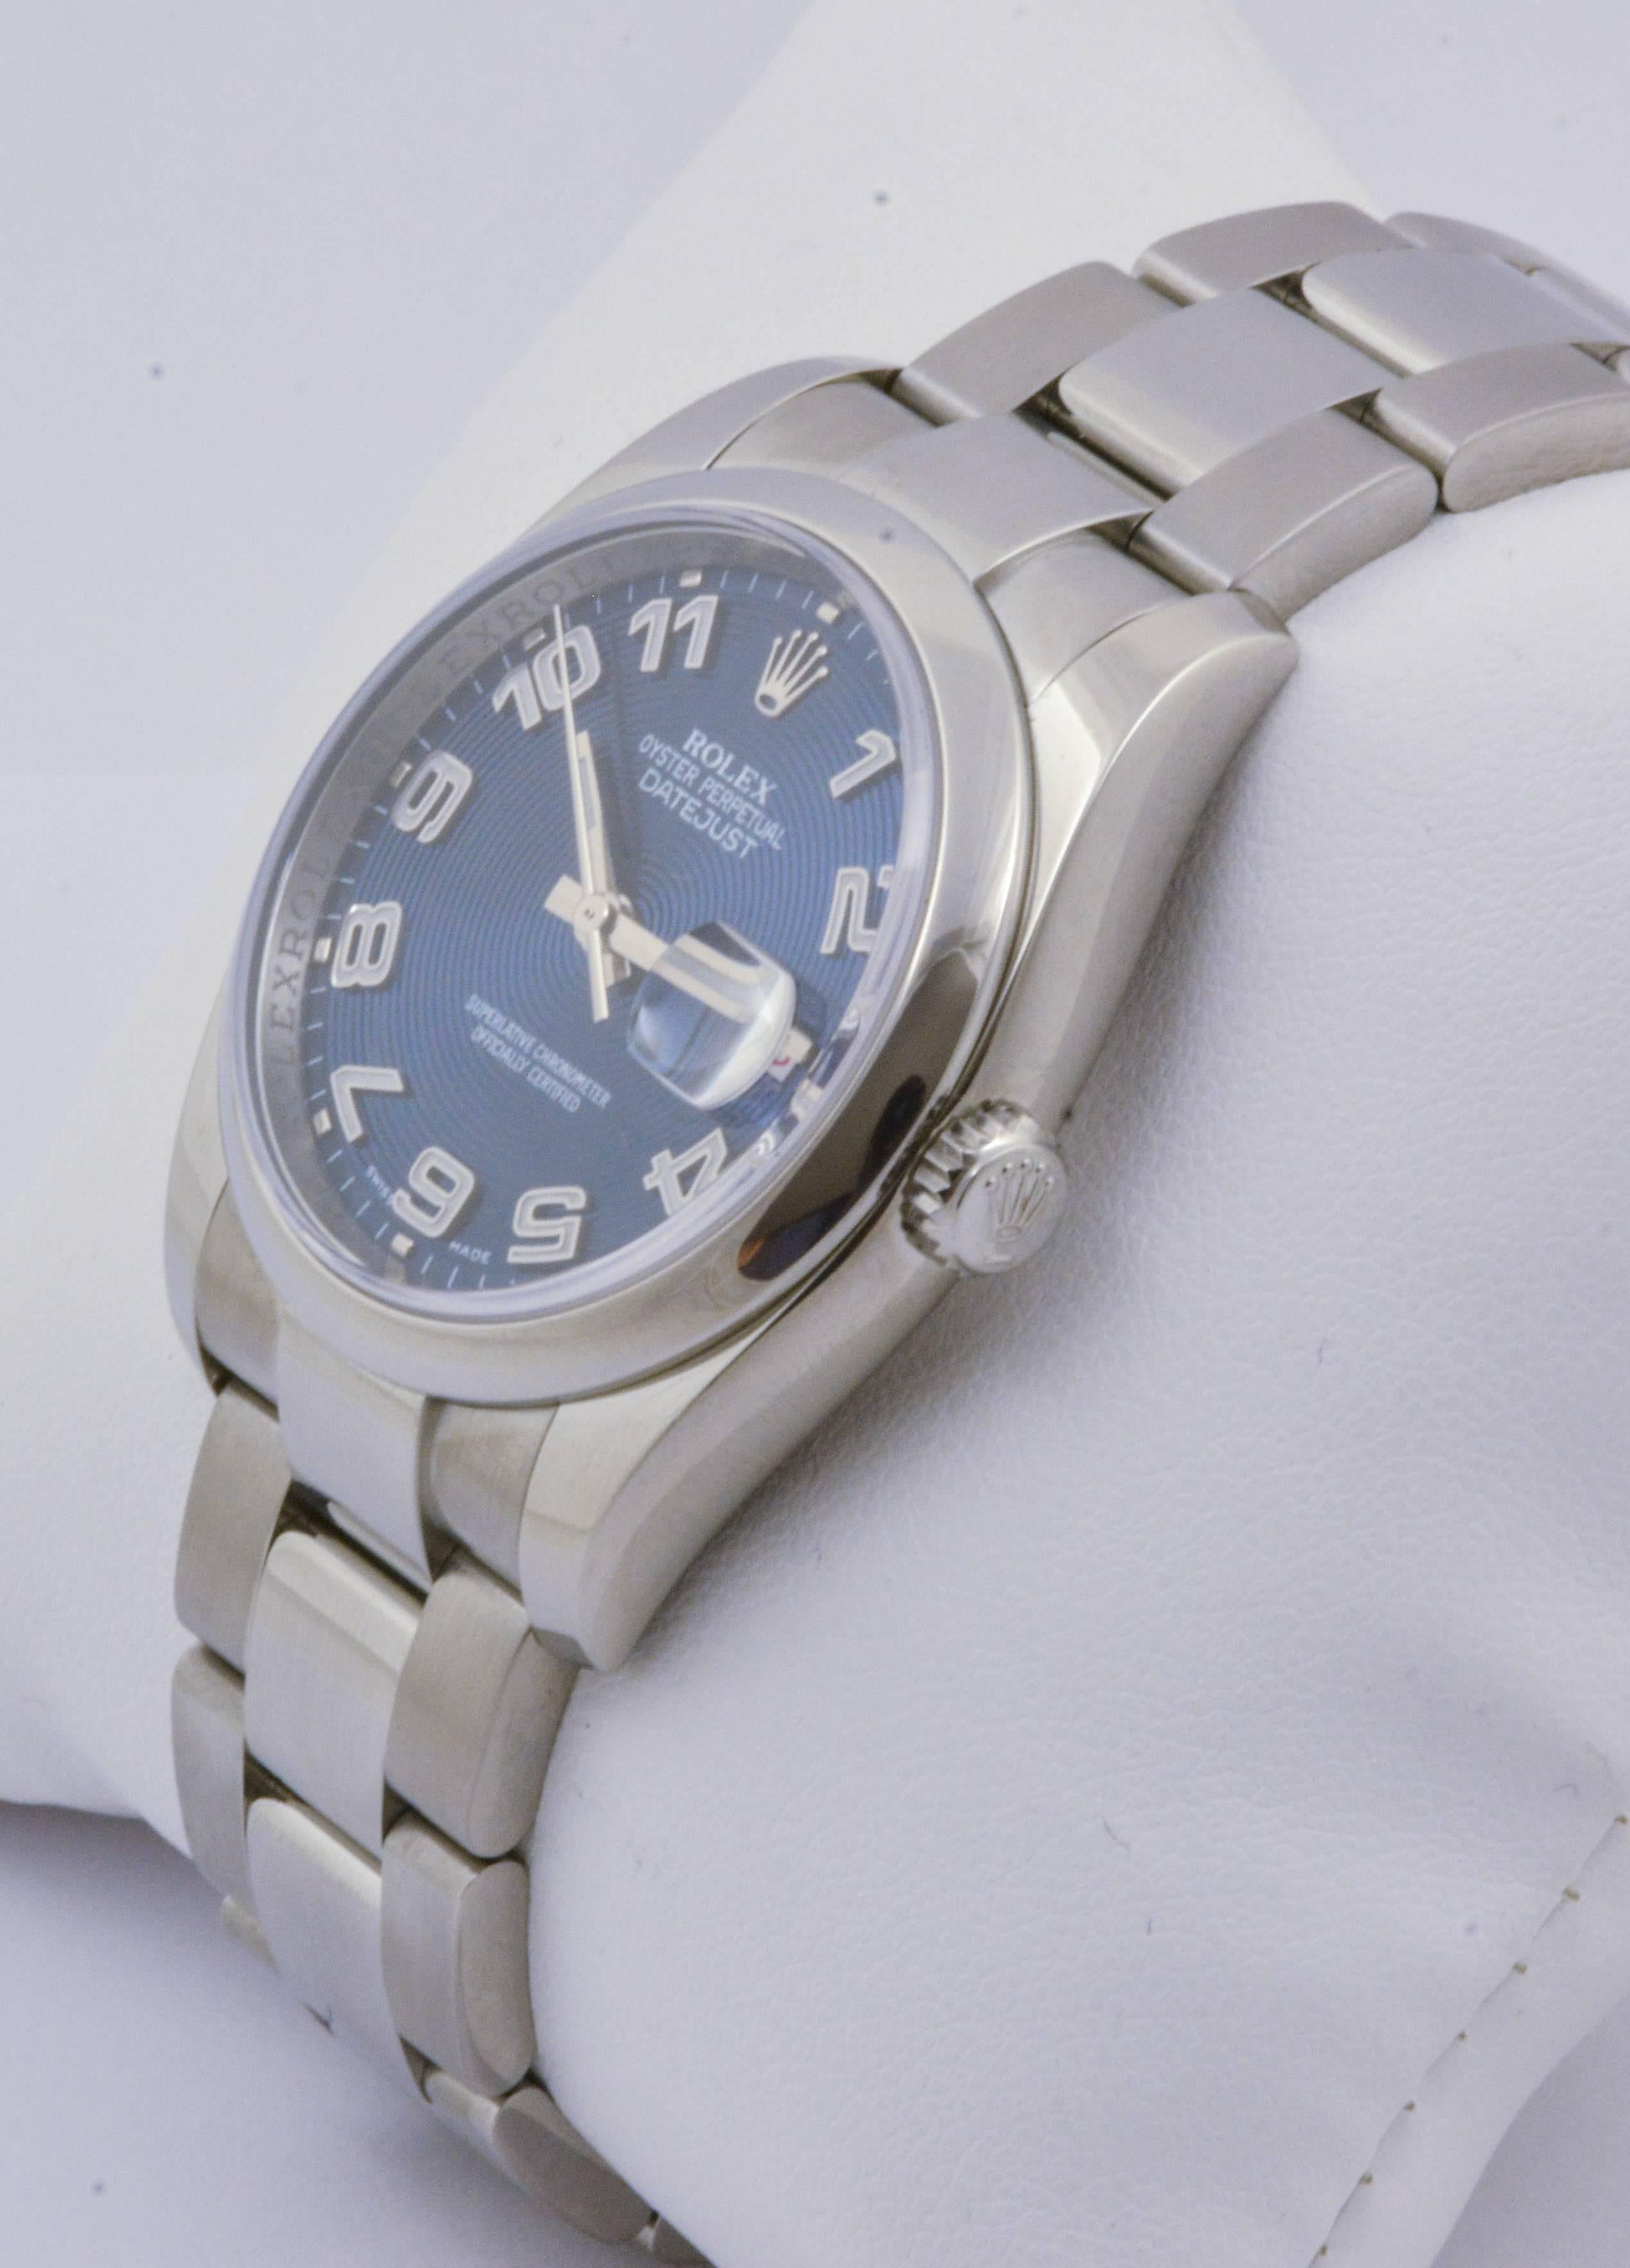 A stunning blue dial with Arabic numerals, sapphire crystal, and a smooth bezel render this 36mm pre-owned Rolex watch simultaneously timeless and hip. An Oyster style bracelet with fold over clasp fastens securely around the wrist in flawless